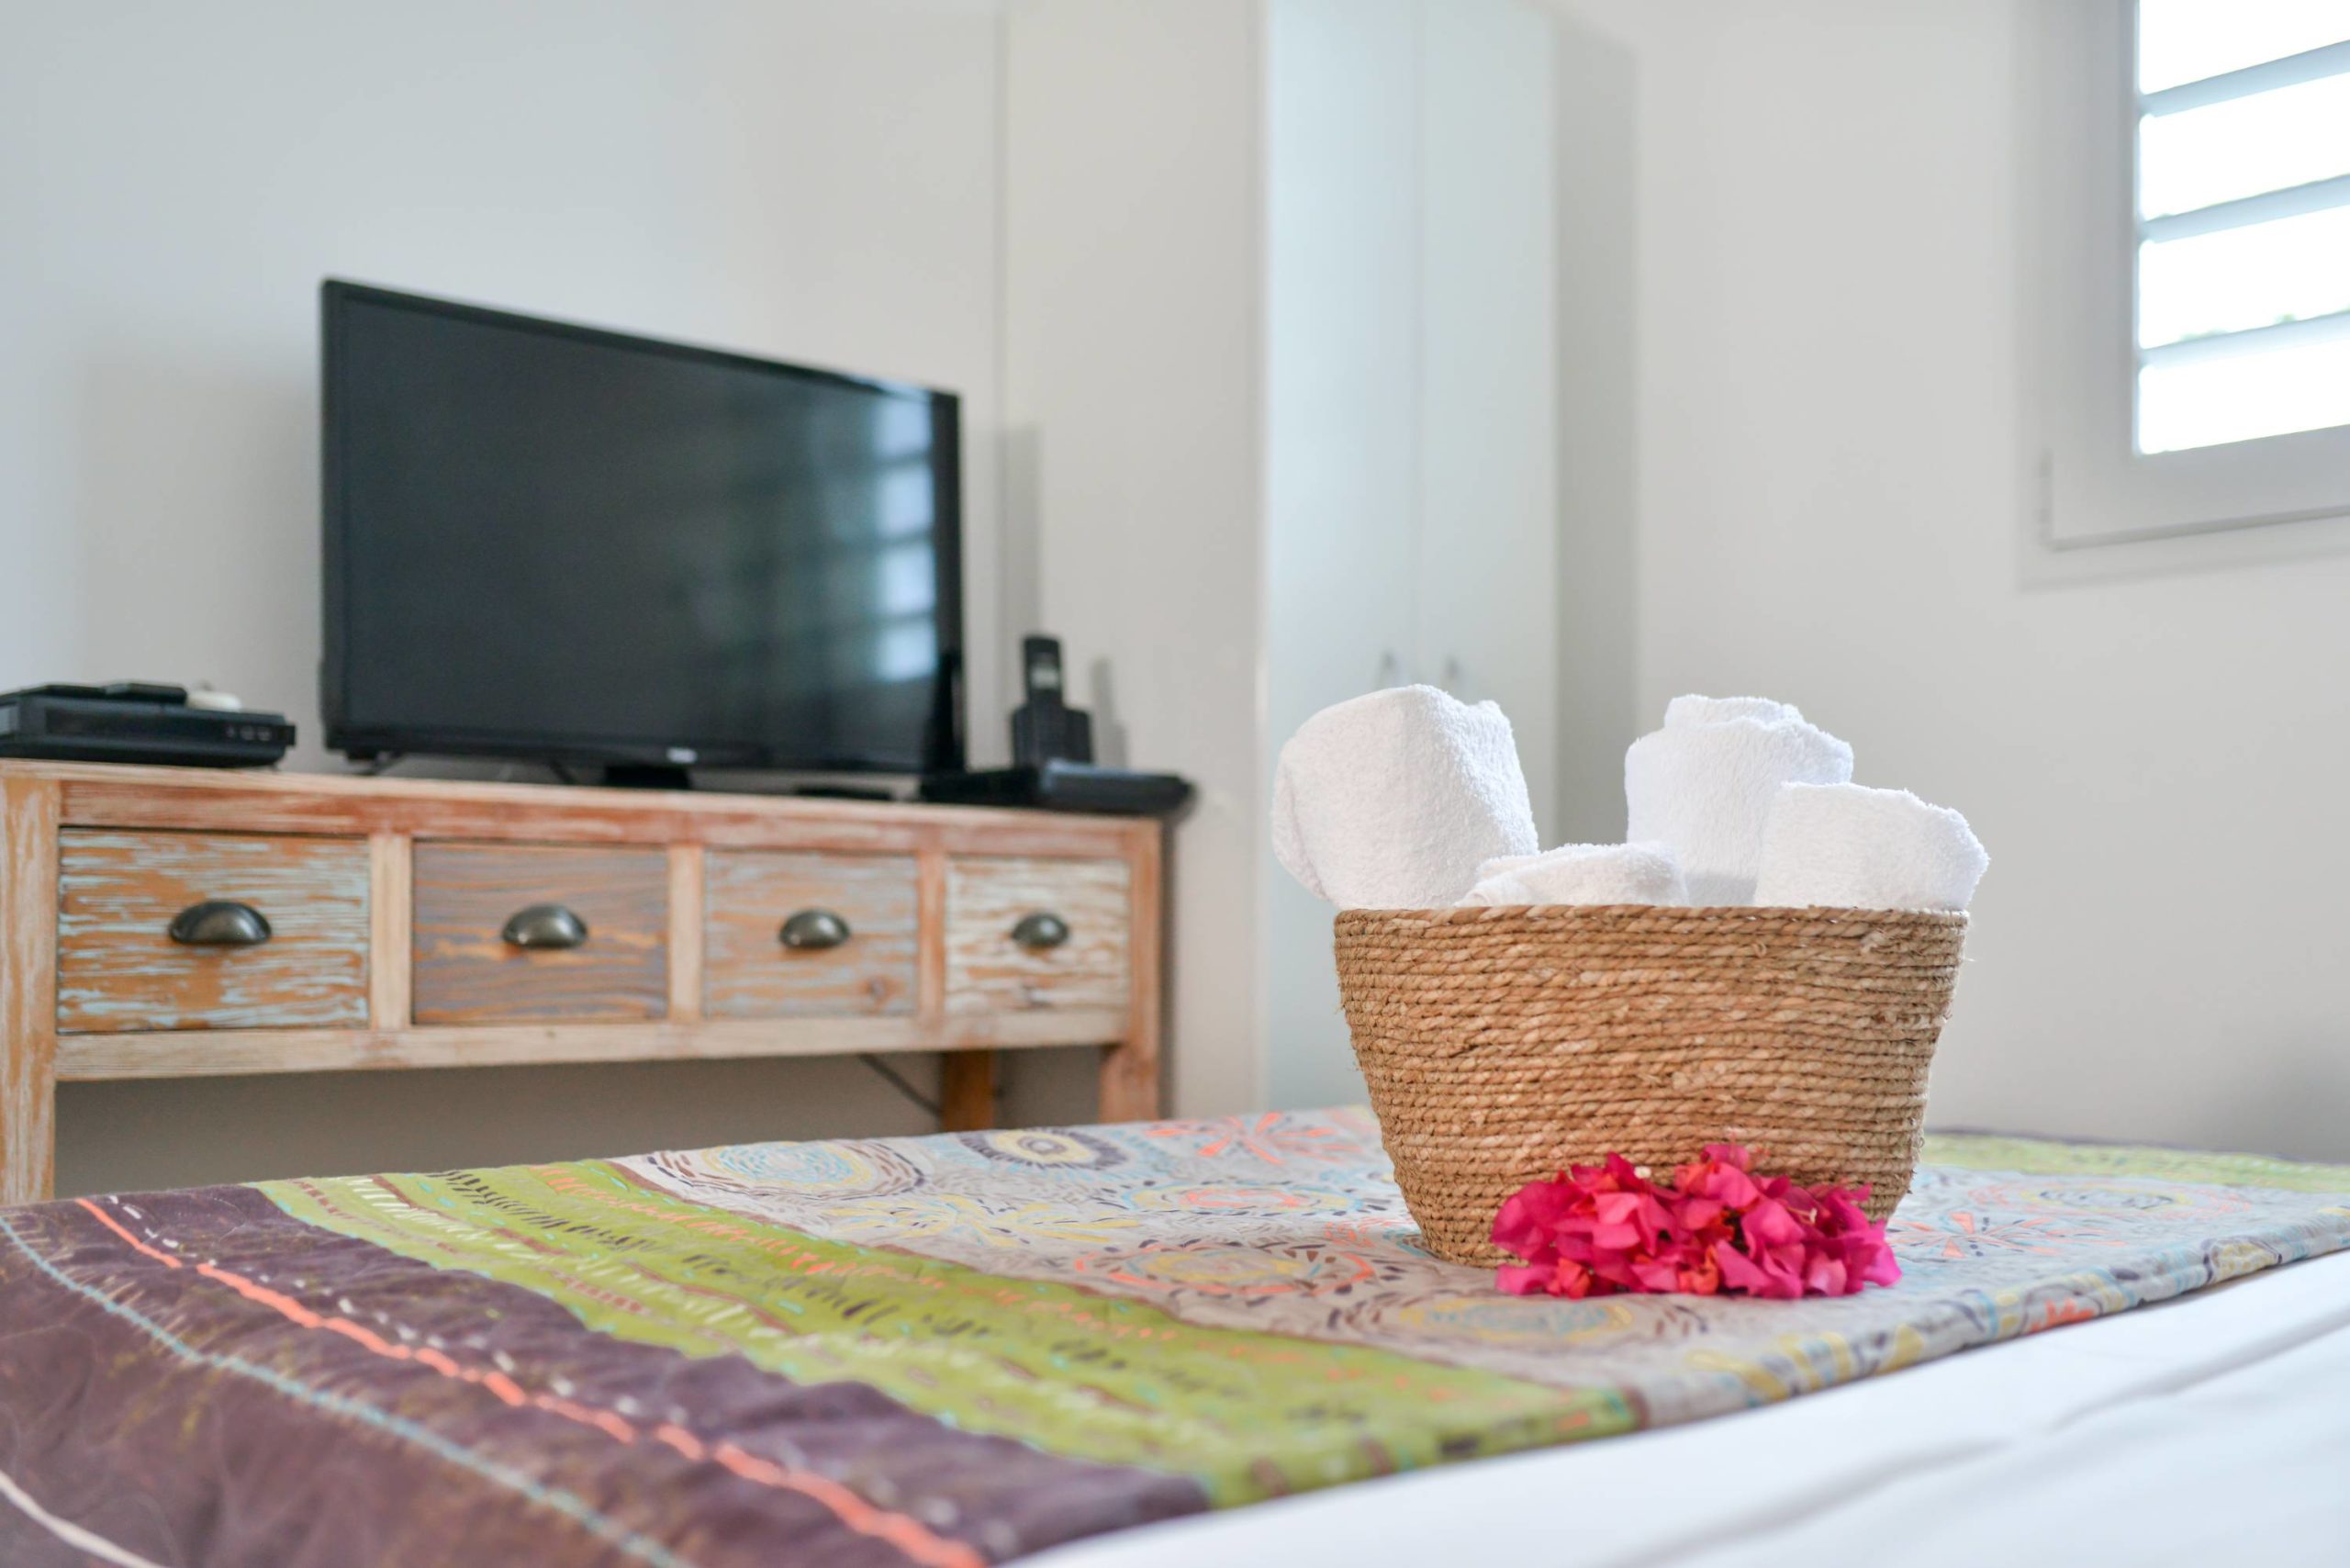 TV on the pink bungalow's bedroom